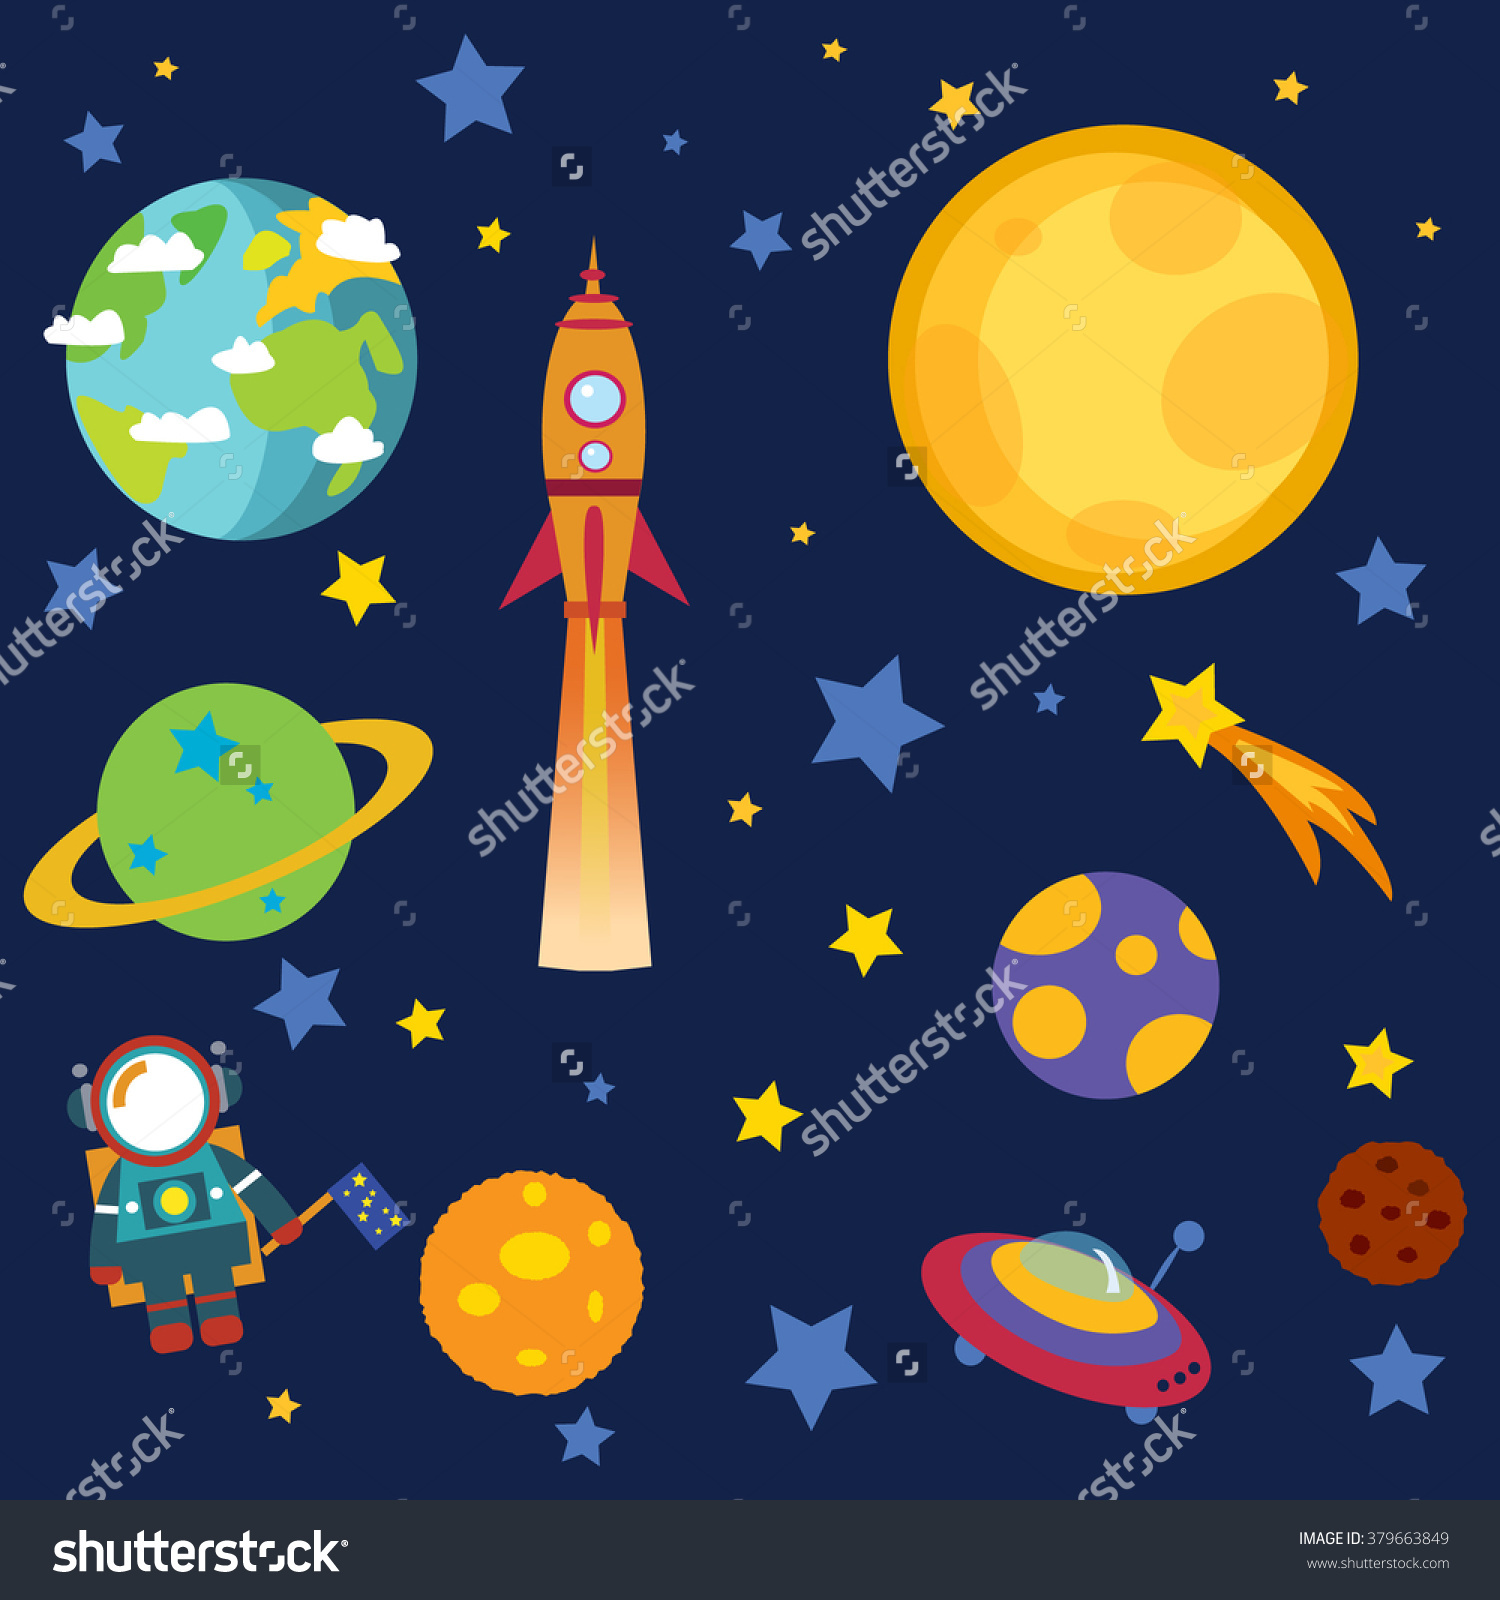 Outer Space Stars Moon Planets Astronaut Stock Vector 379663849.